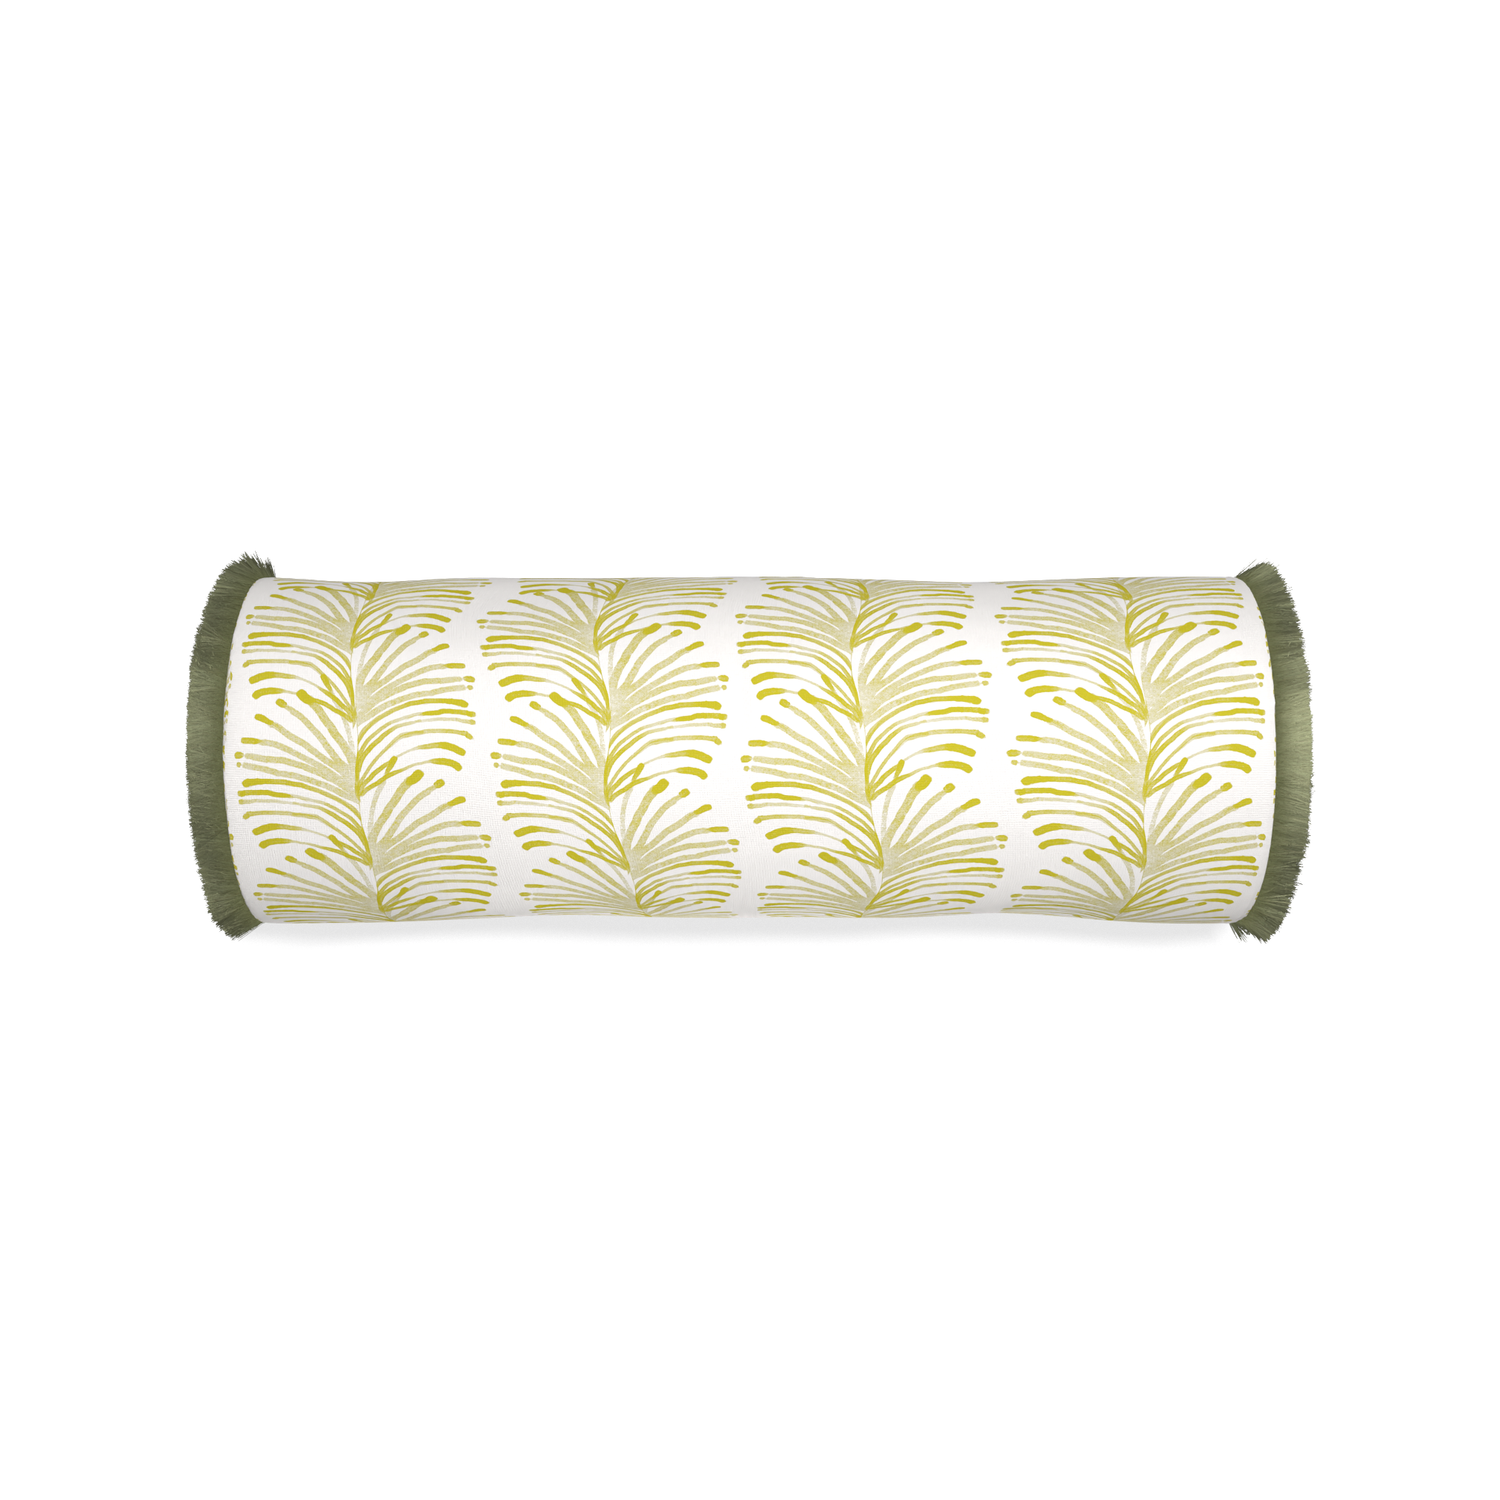 Bolster emma chartreuse custom yellow stripe chartreusepillow with sage fringe on white background